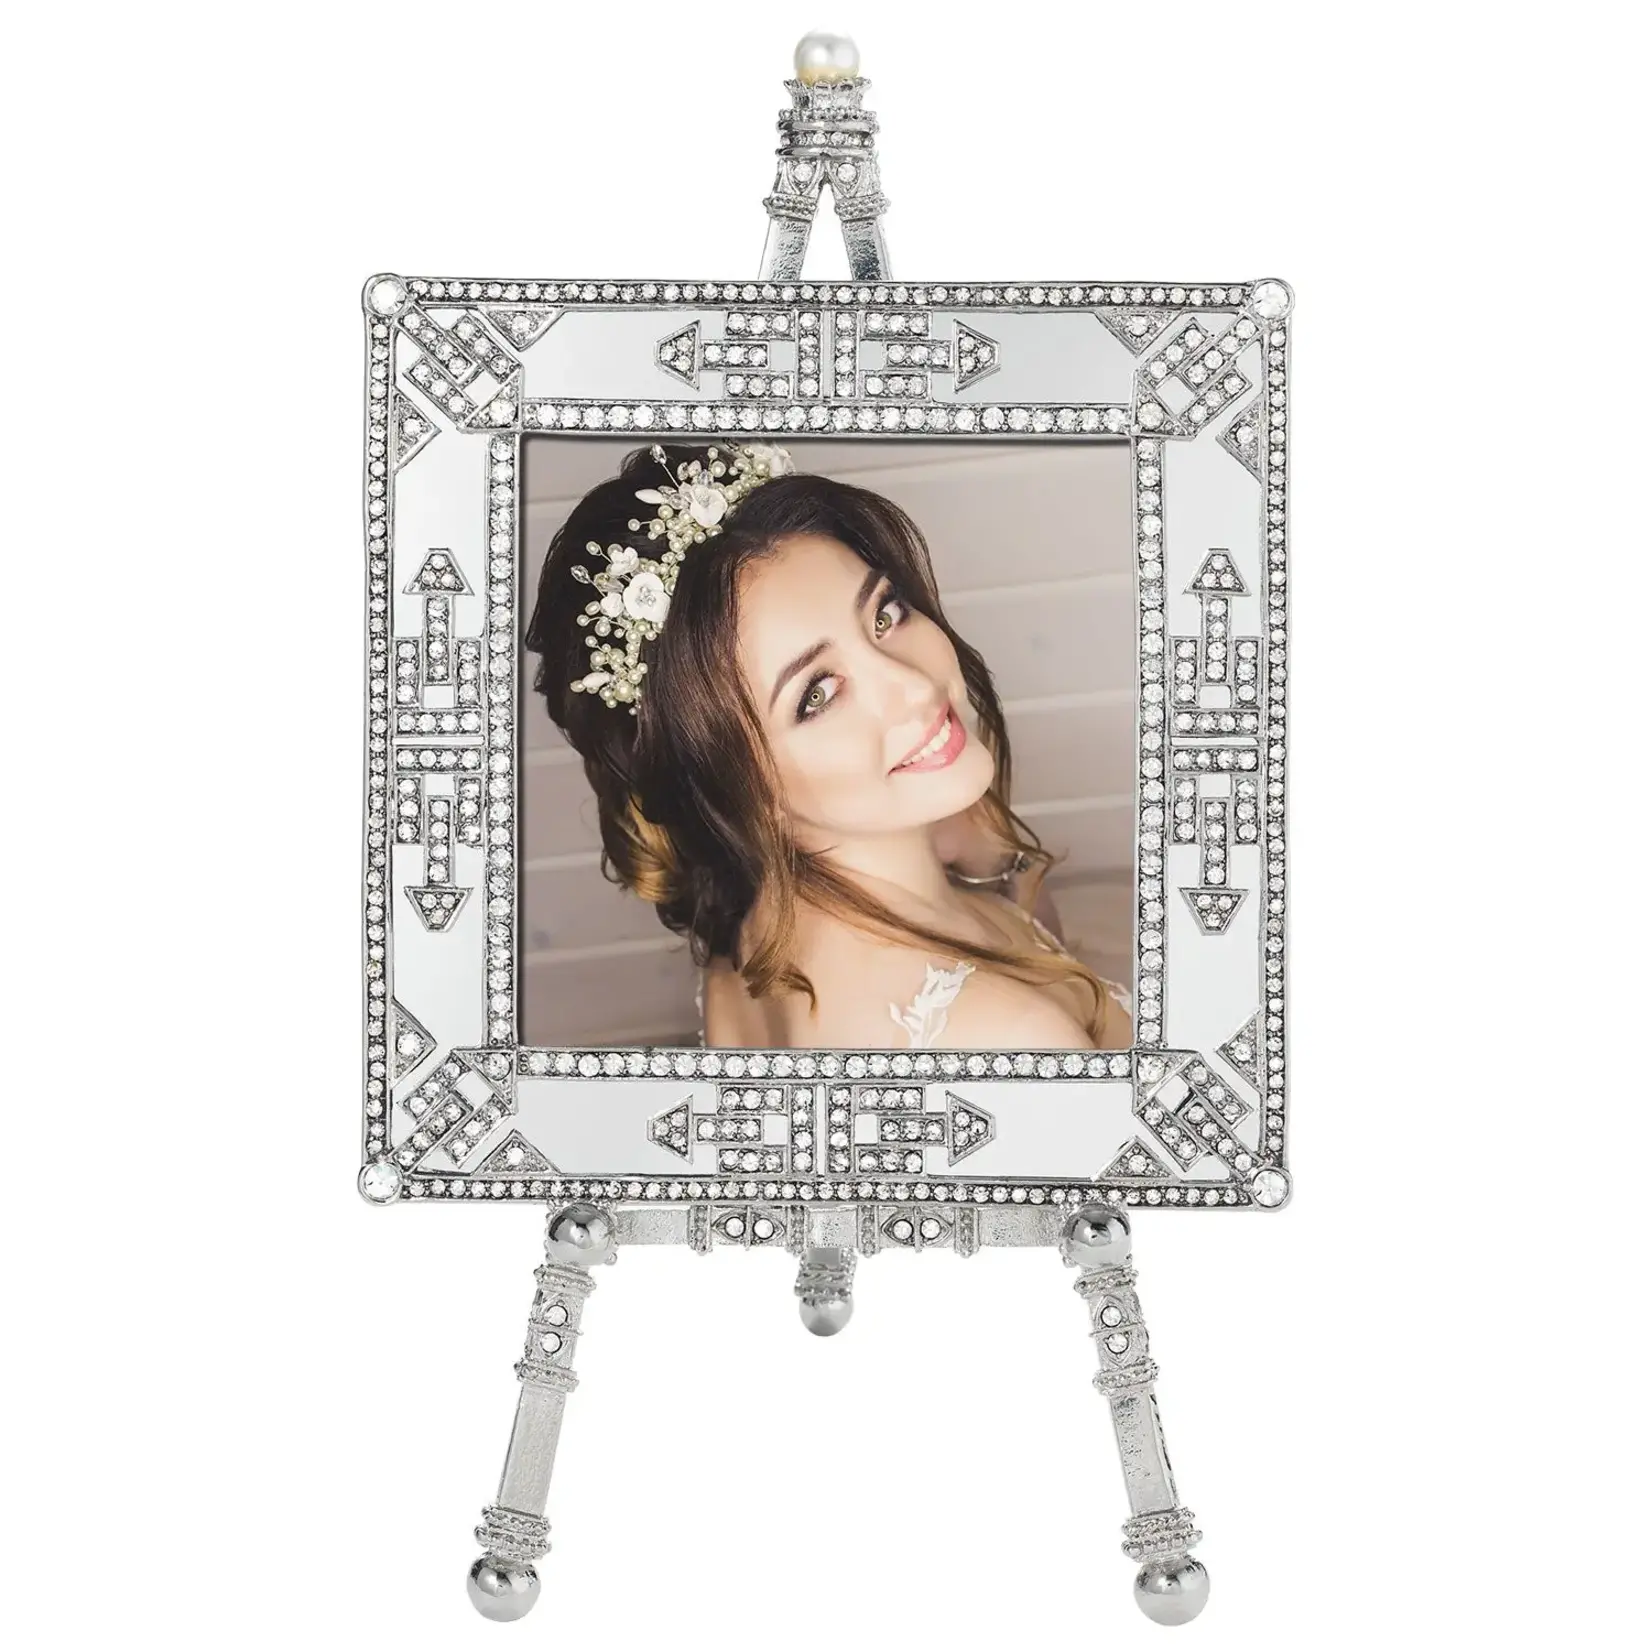 Olivia Riegel Deco Mirror 3.5" x 3.5" Frame on Easel Silver